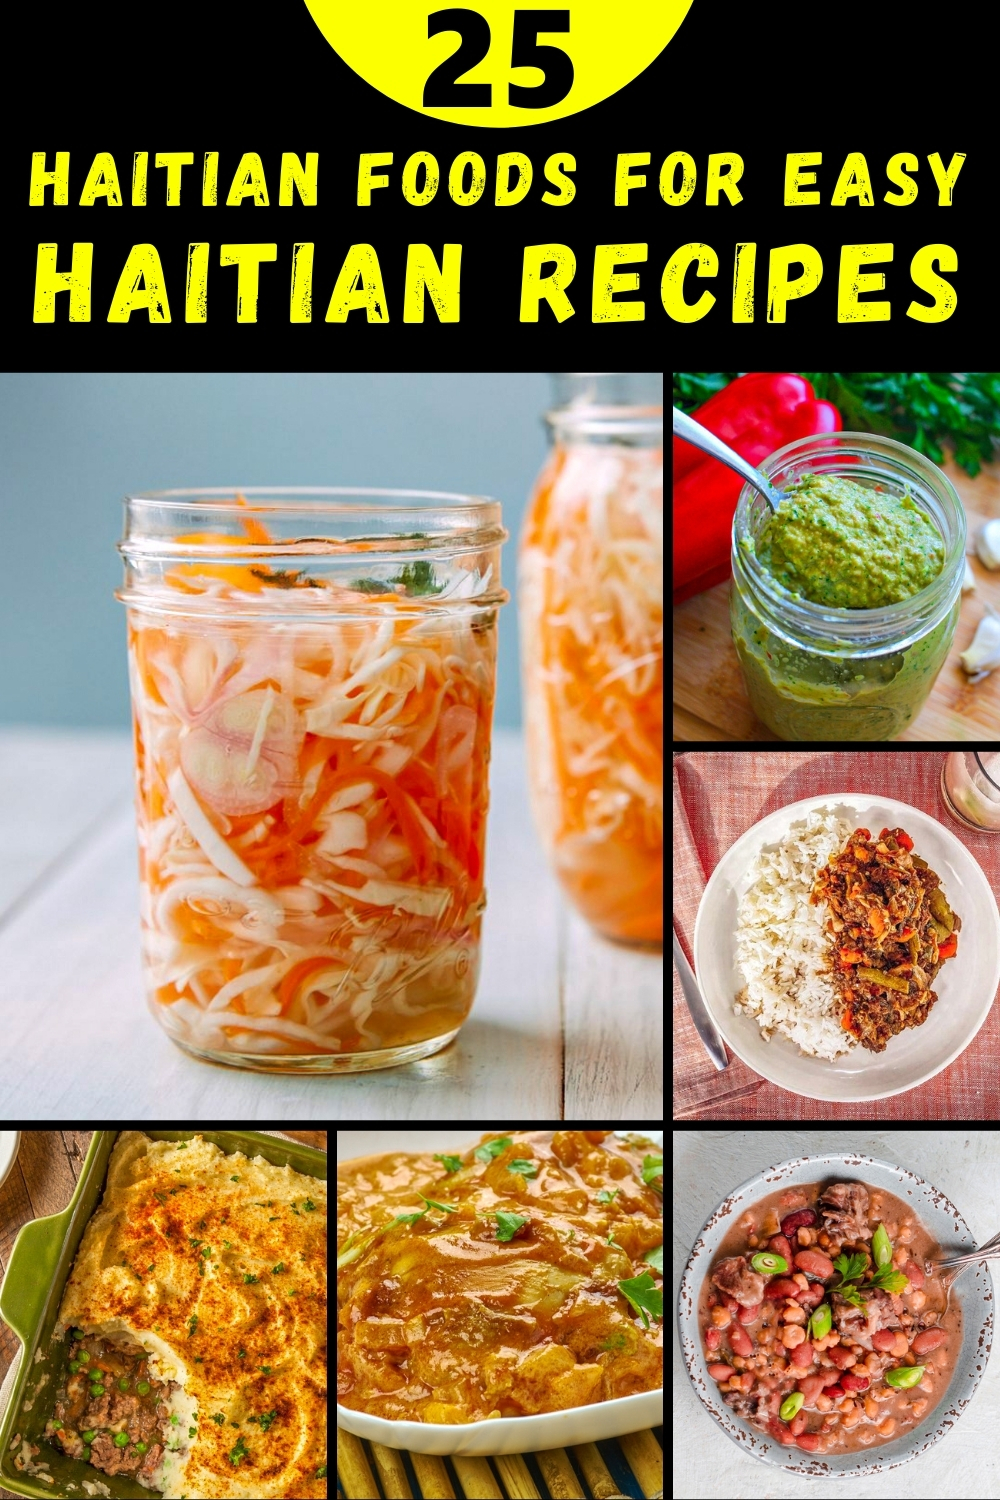 Haitian Recipes and Drinks